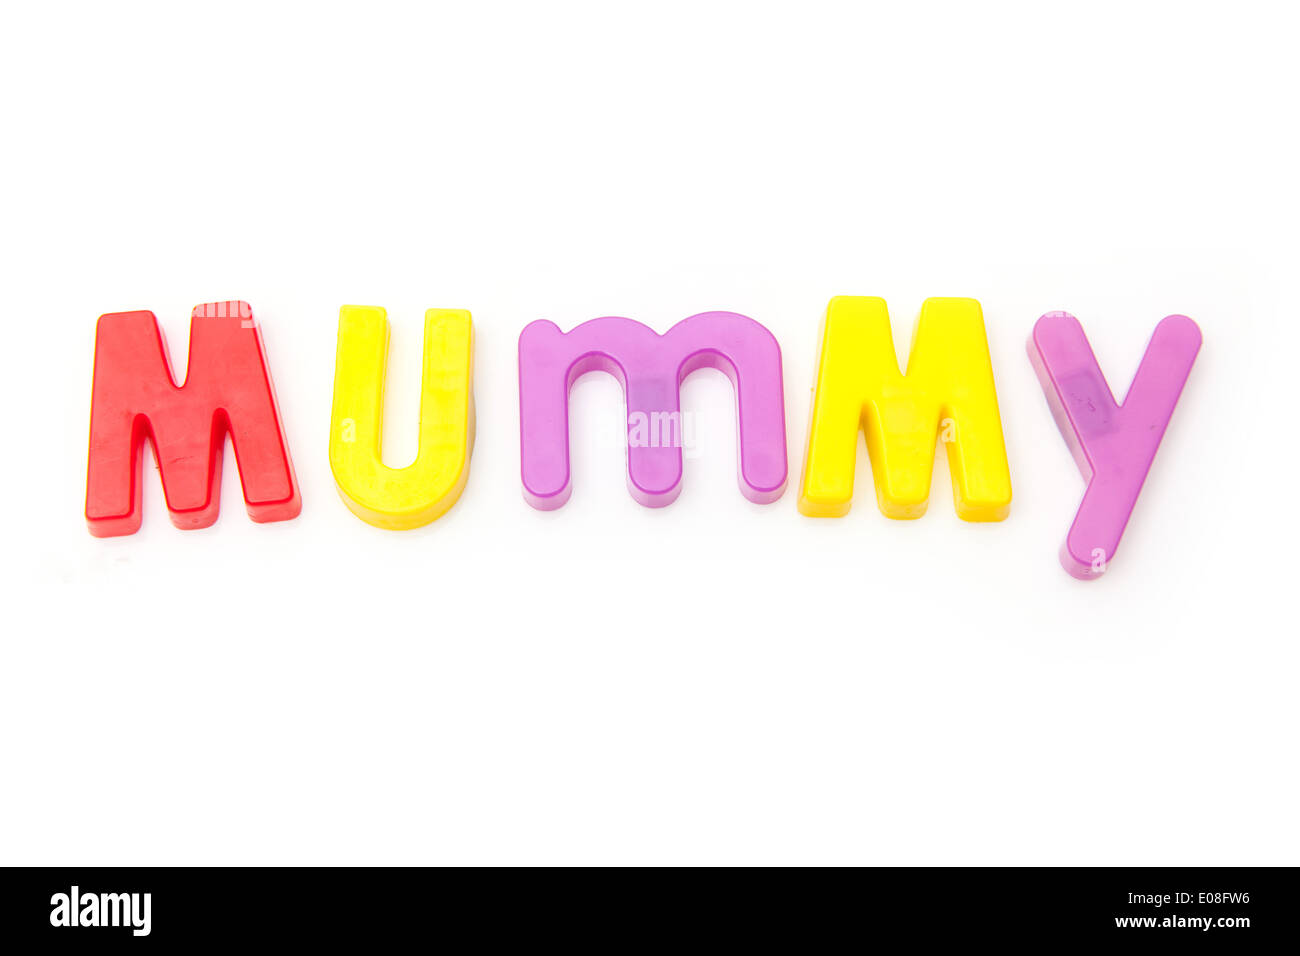 Mummy written in magnetic letters on a white studio background. Stock Photo